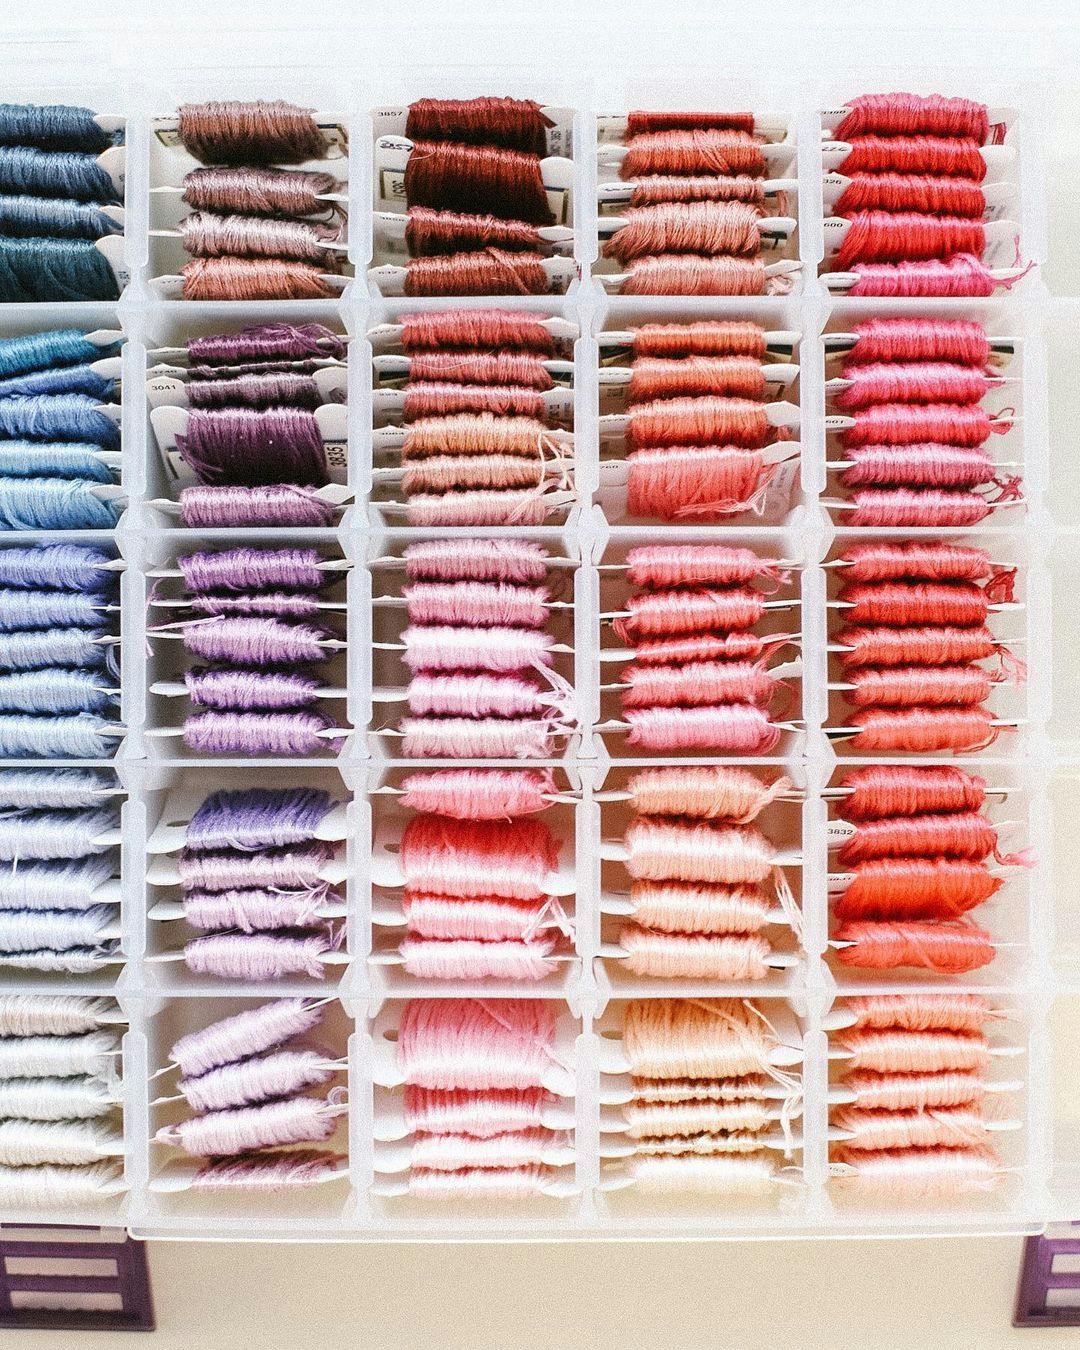 Embroidery floss organized in a storage box